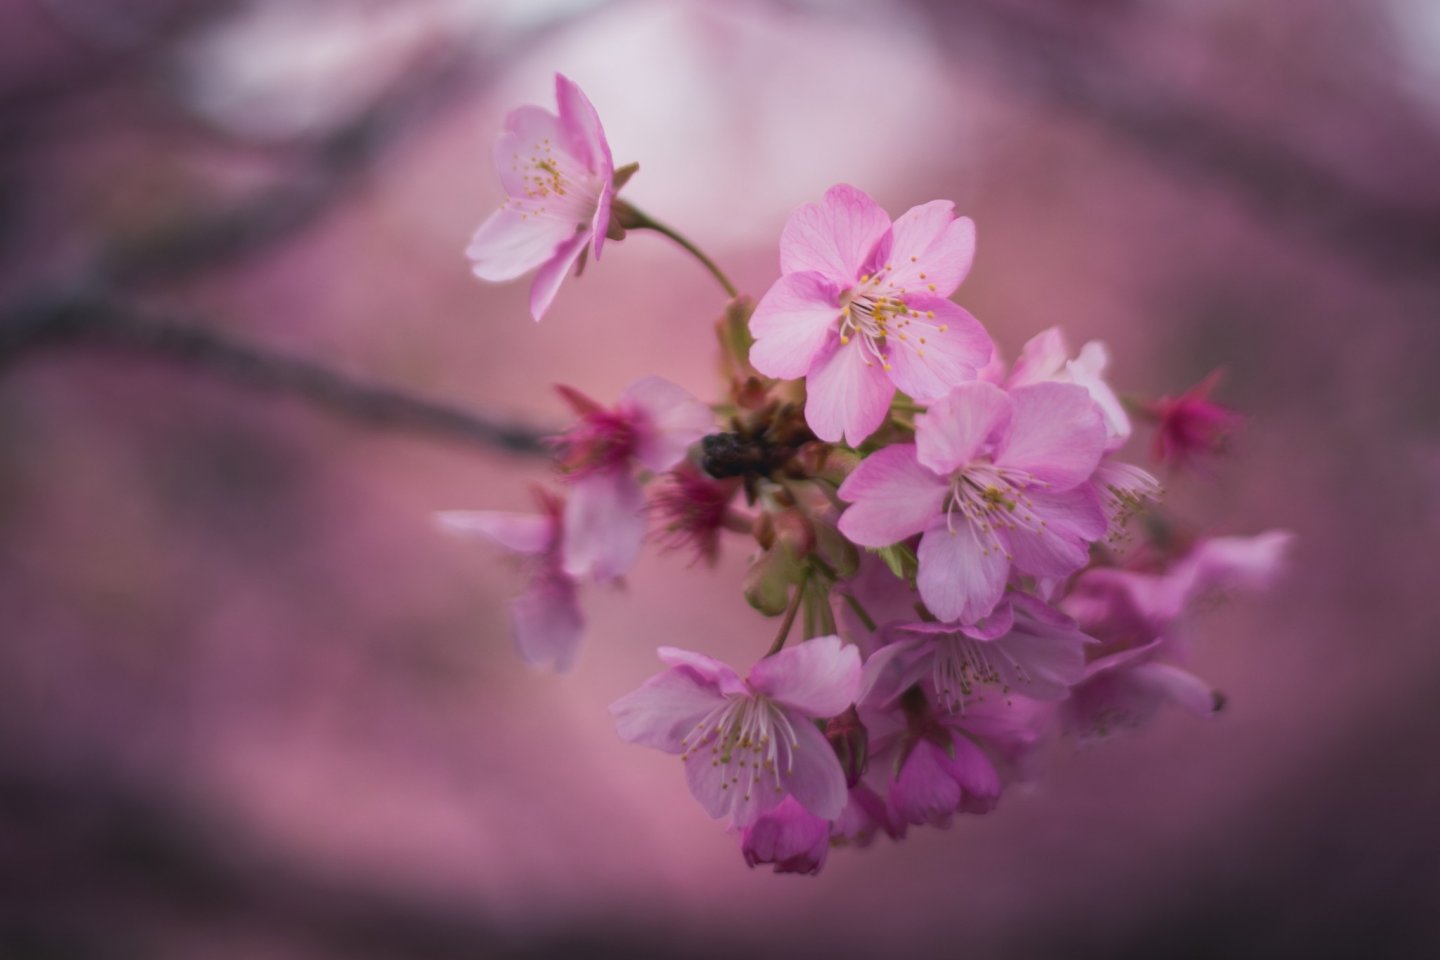 Even up close, the blossoms amaze with their delicate beauty.